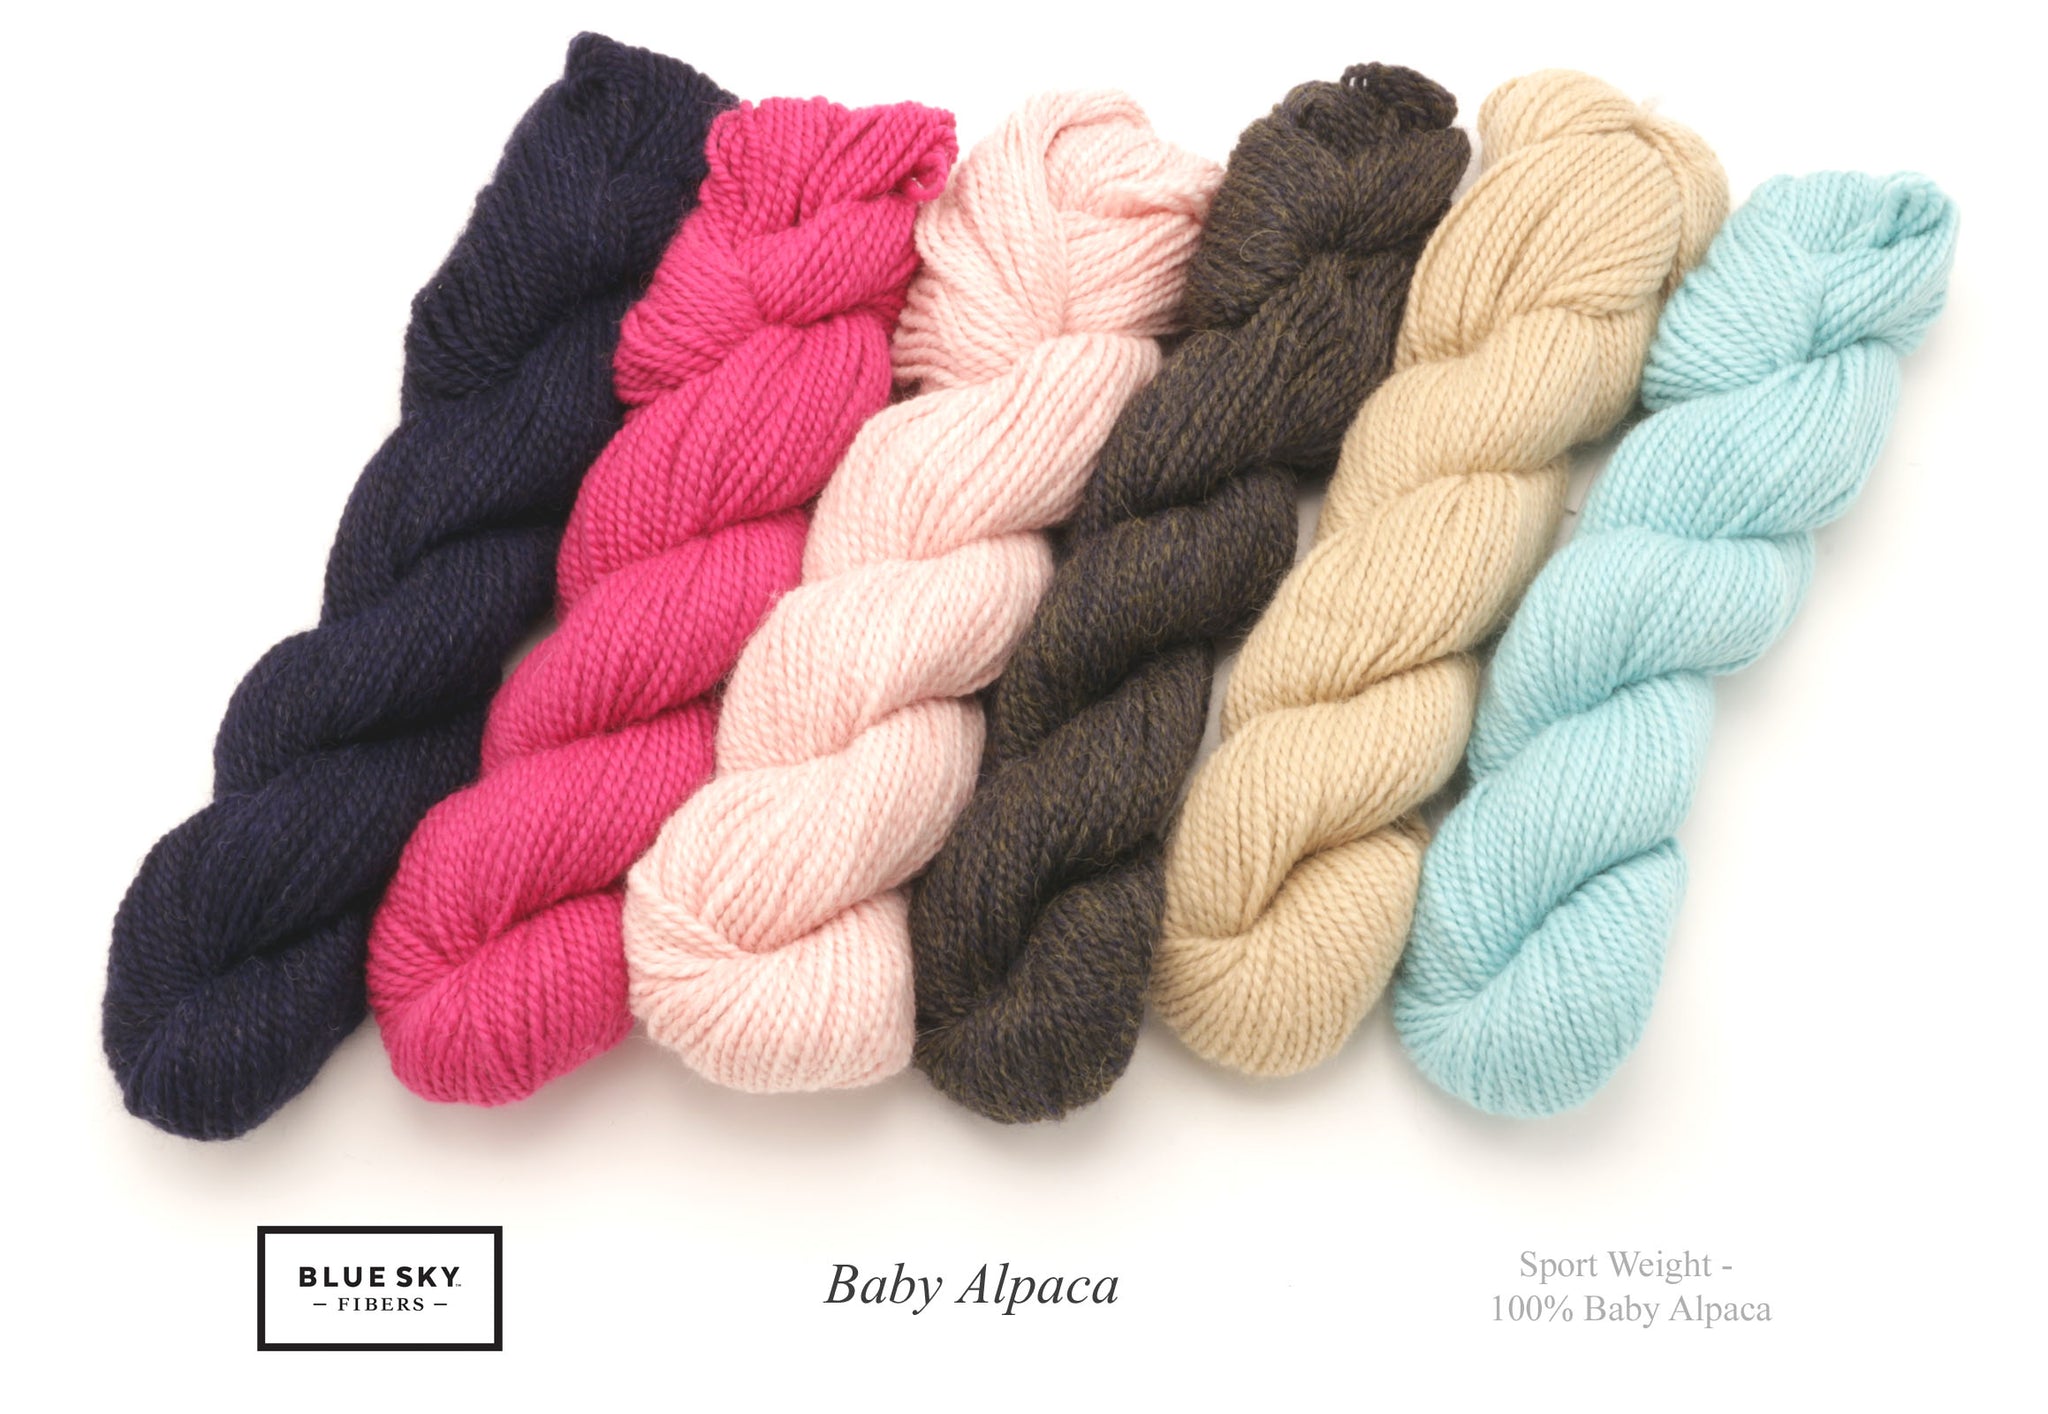 100% Alpaca Sport Weight Yarns in Natural Colors